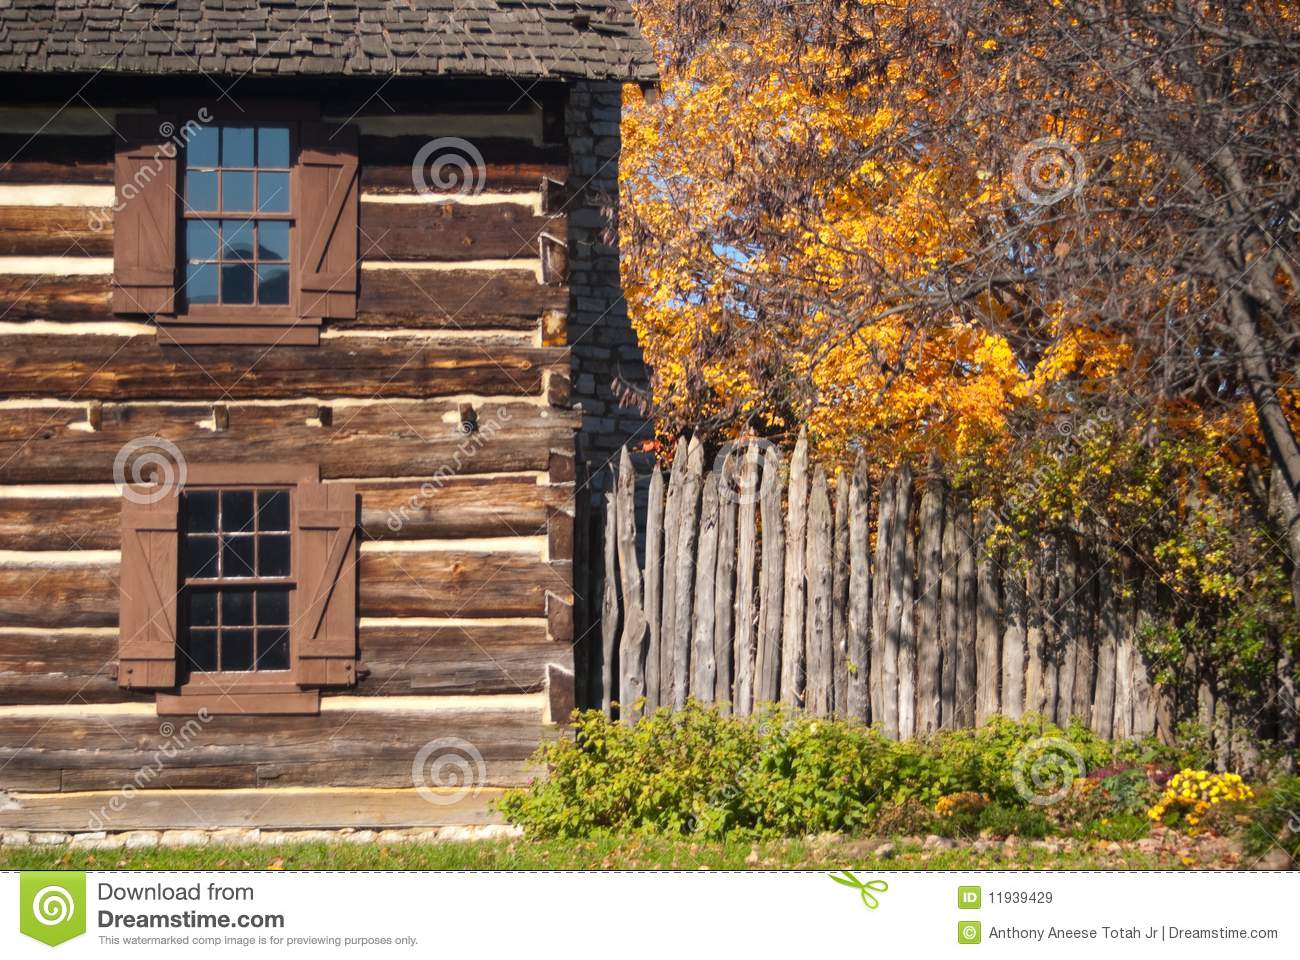 Rustic Fall Setting Of Old Log Cabin With Trees In Fall Color